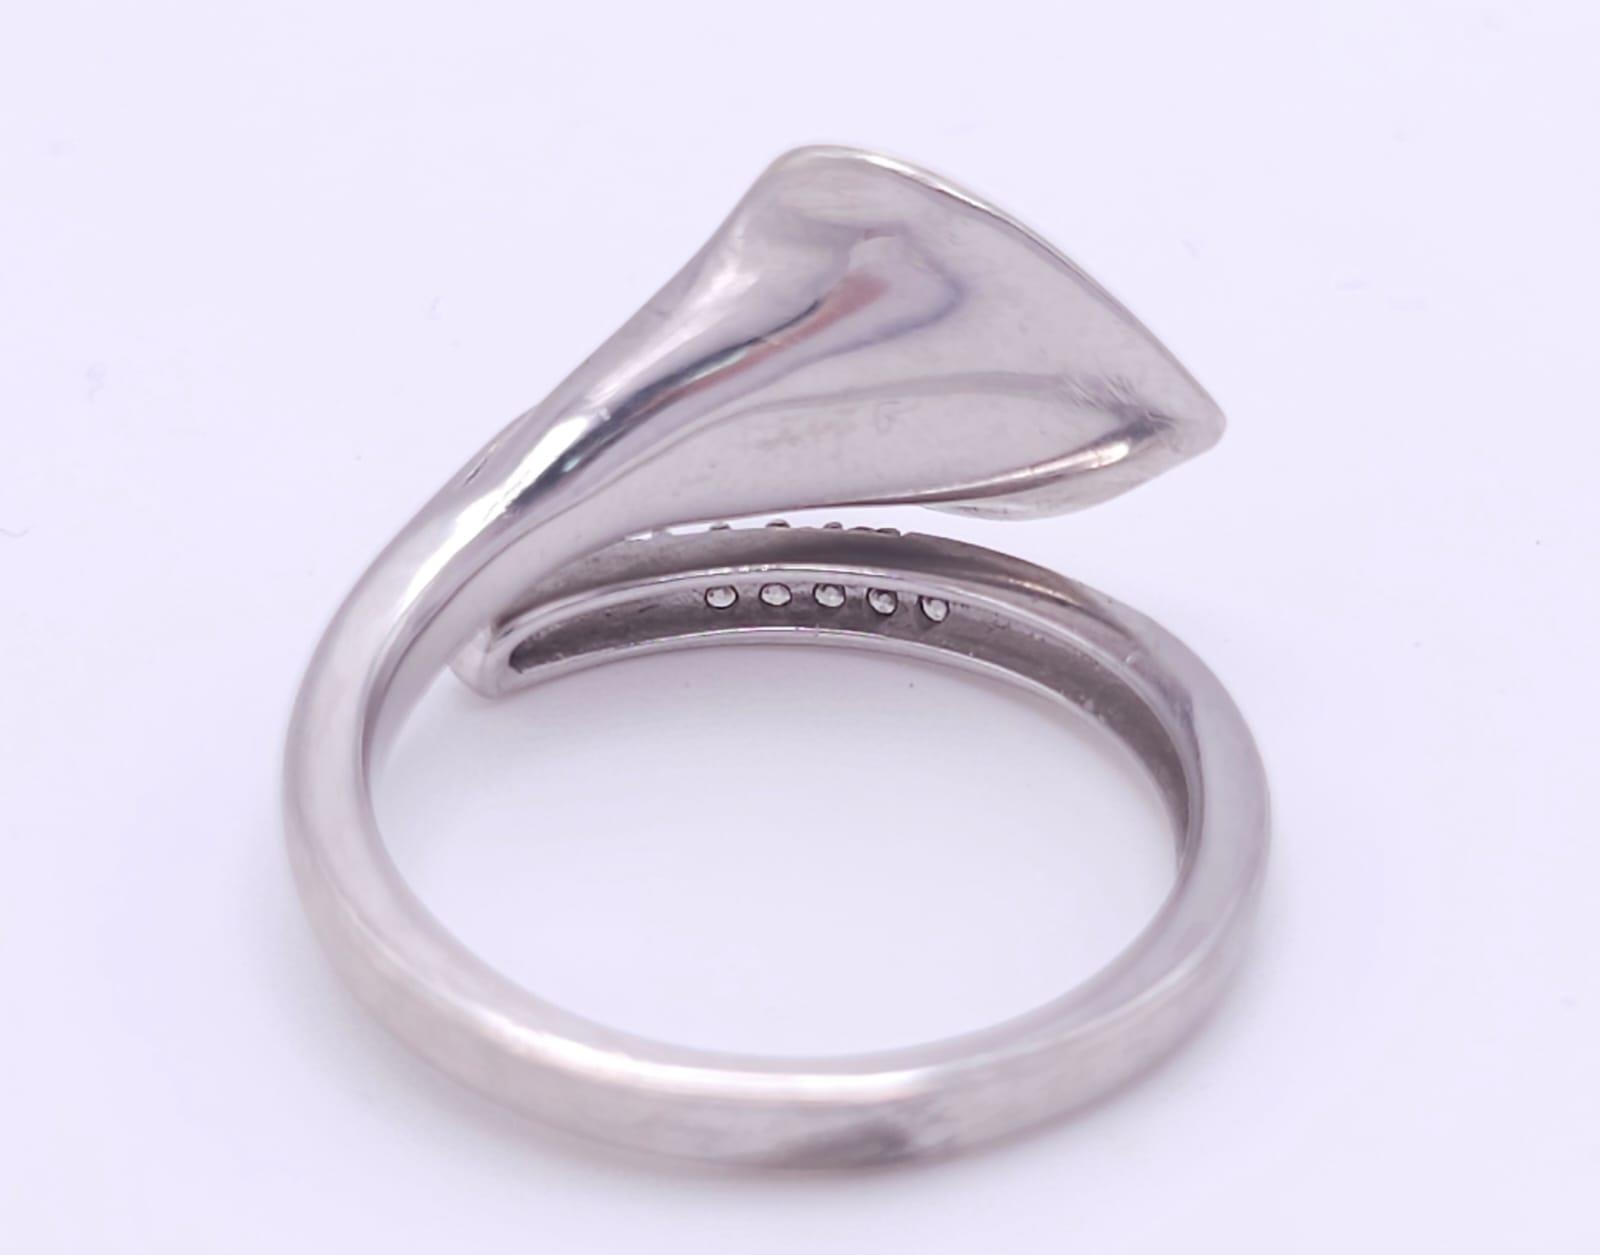 Three Different Style Fancy Sterling Silver Rings - 2 x P, 1 x N. 21.2g total weight. Ref: 016551. - Image 17 of 19